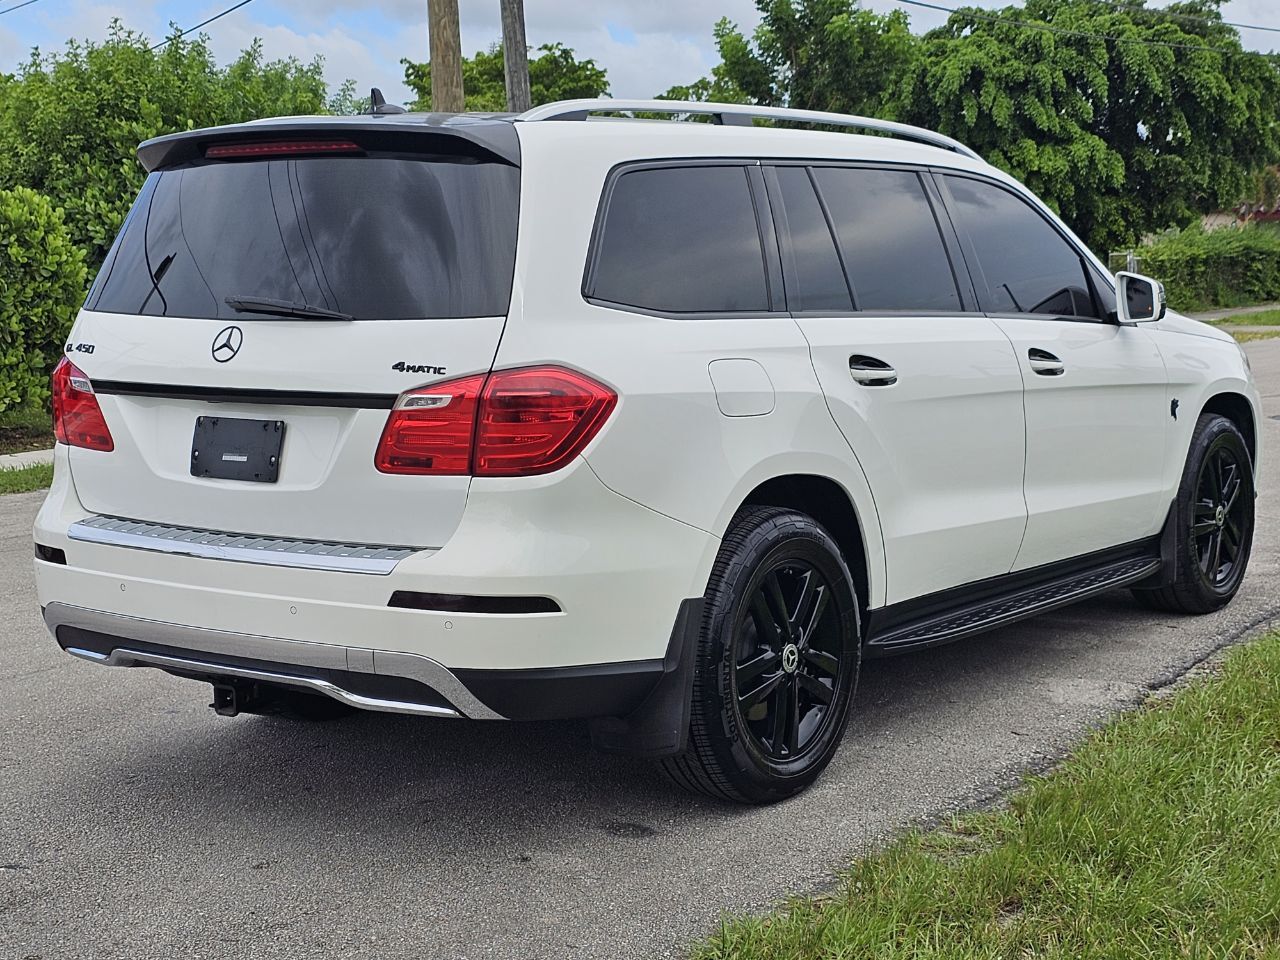 2015 MERCEDES-BENZ GL-Class SUV / Crossover - $13,845